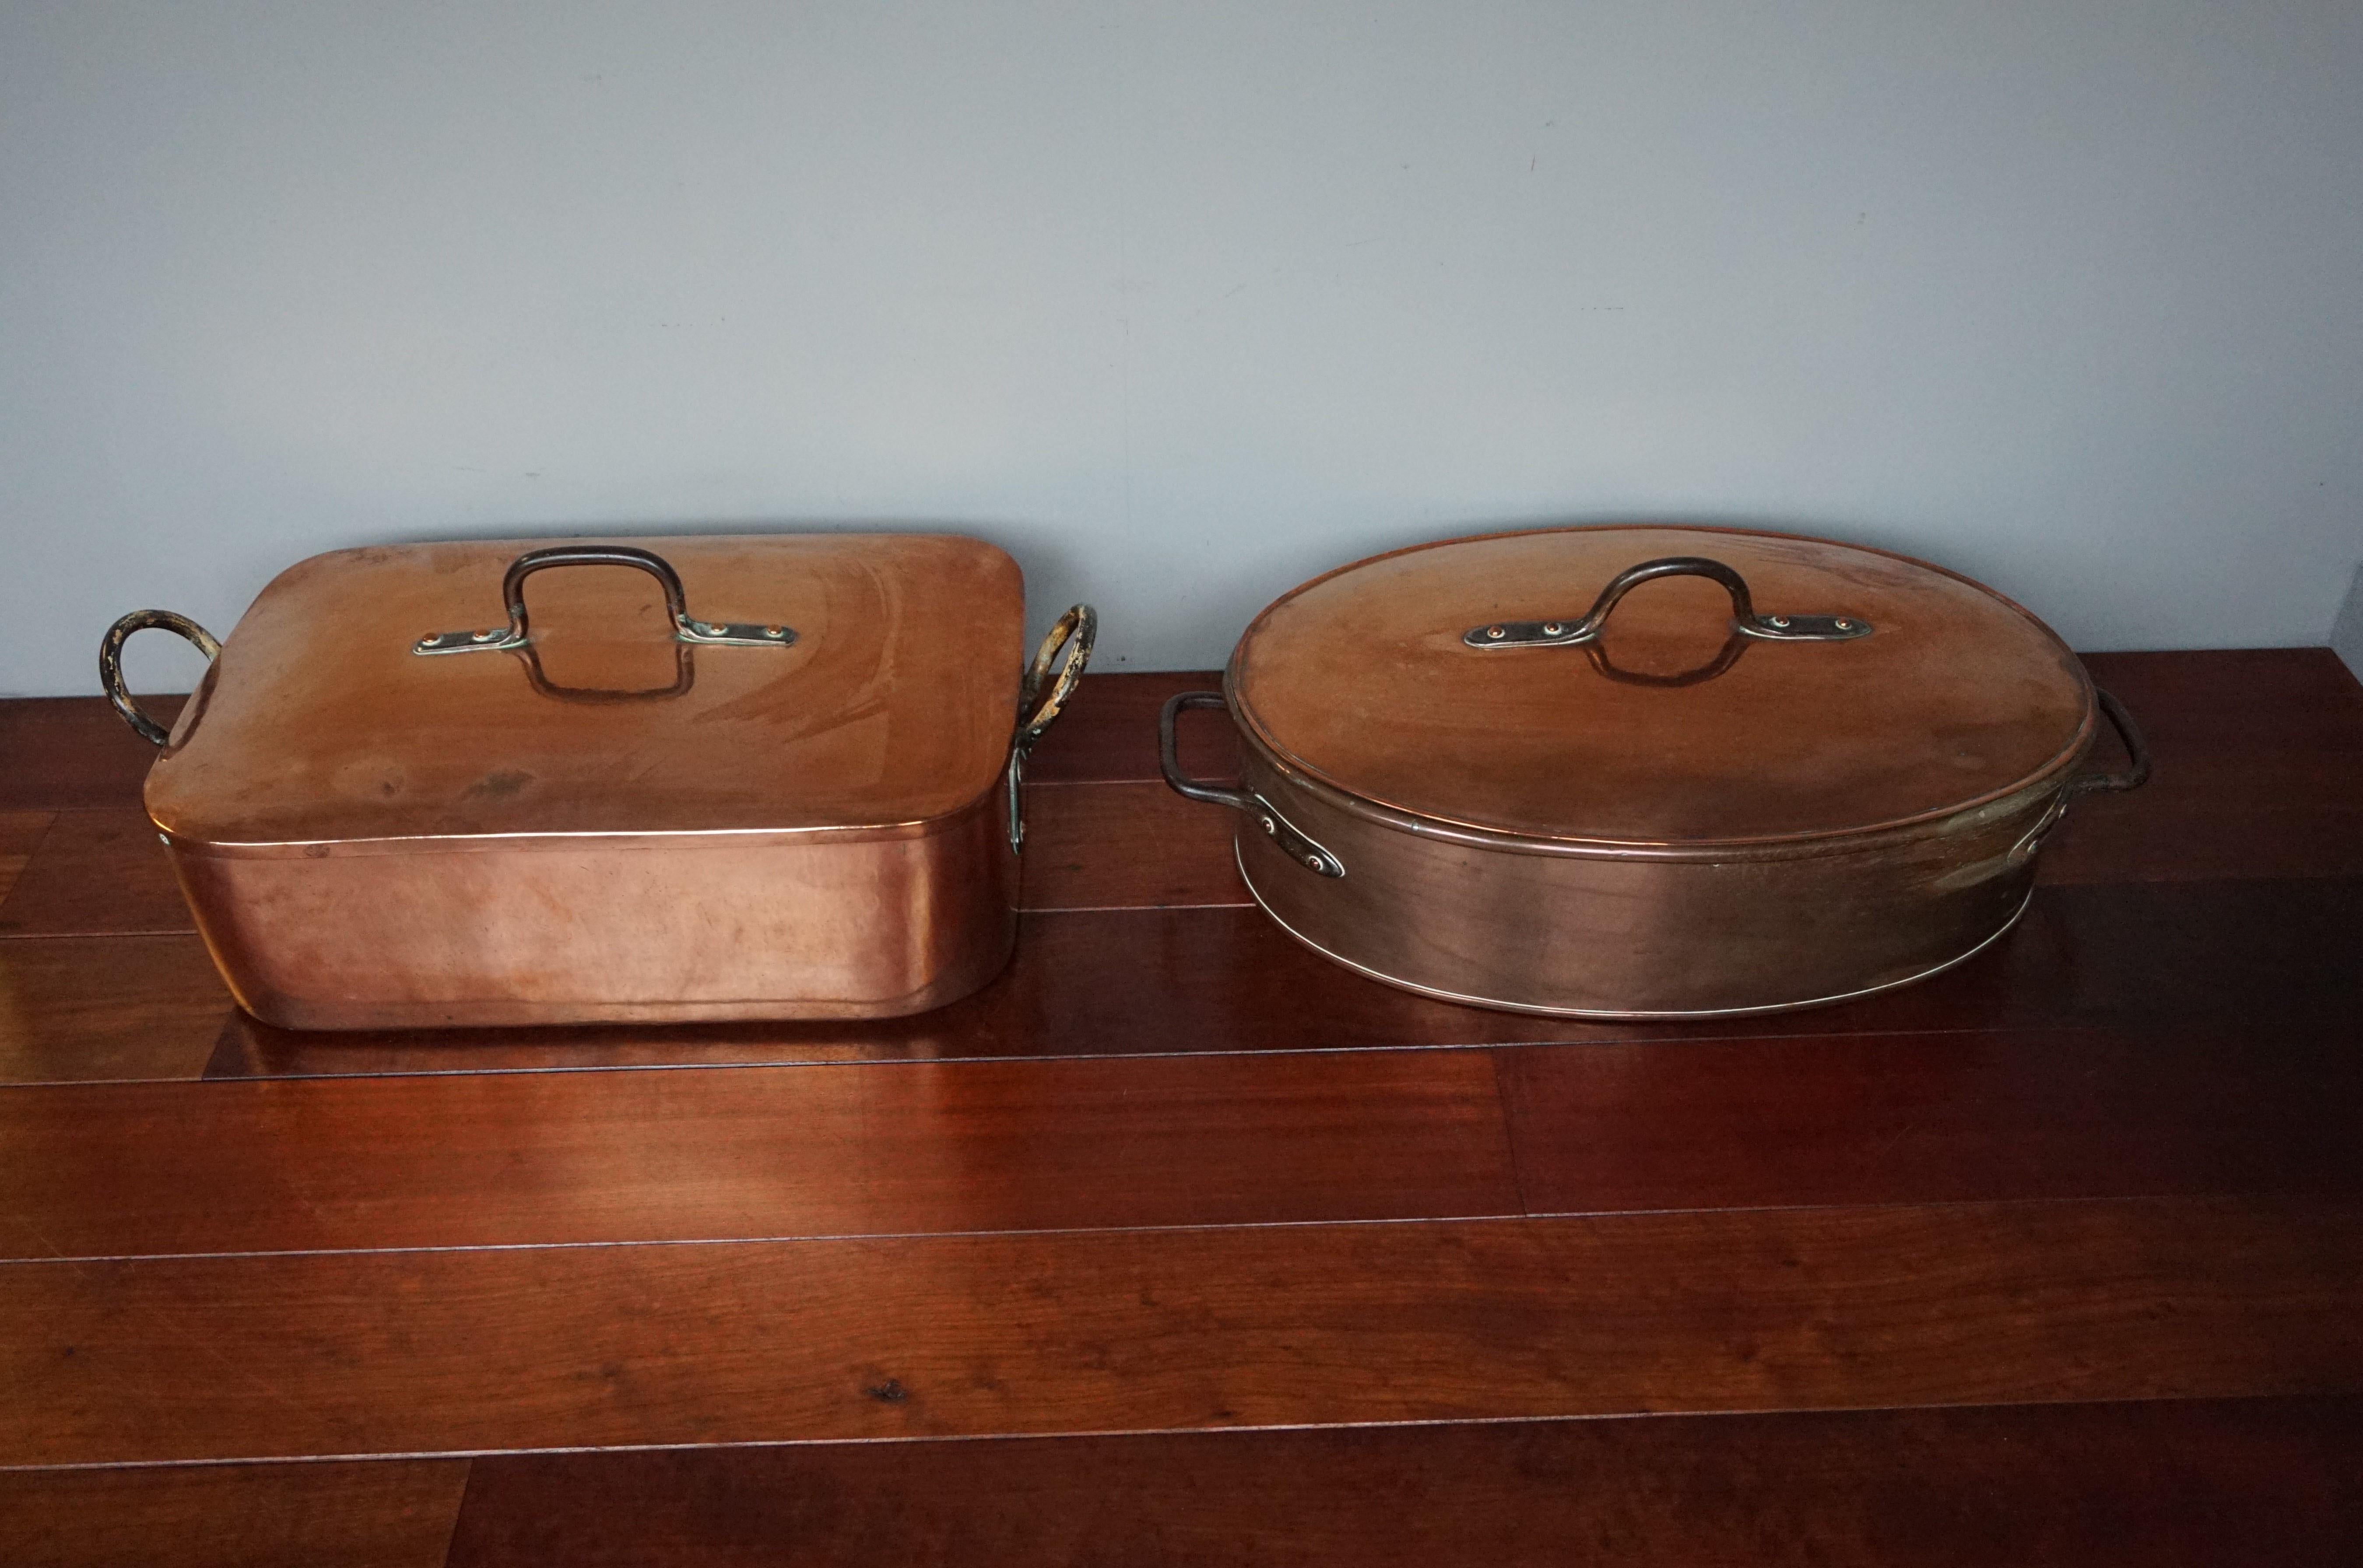 Stunning & Largest Ever Pair of Antique Copper Pans for Wild Roast in Late 1700s For Sale 4